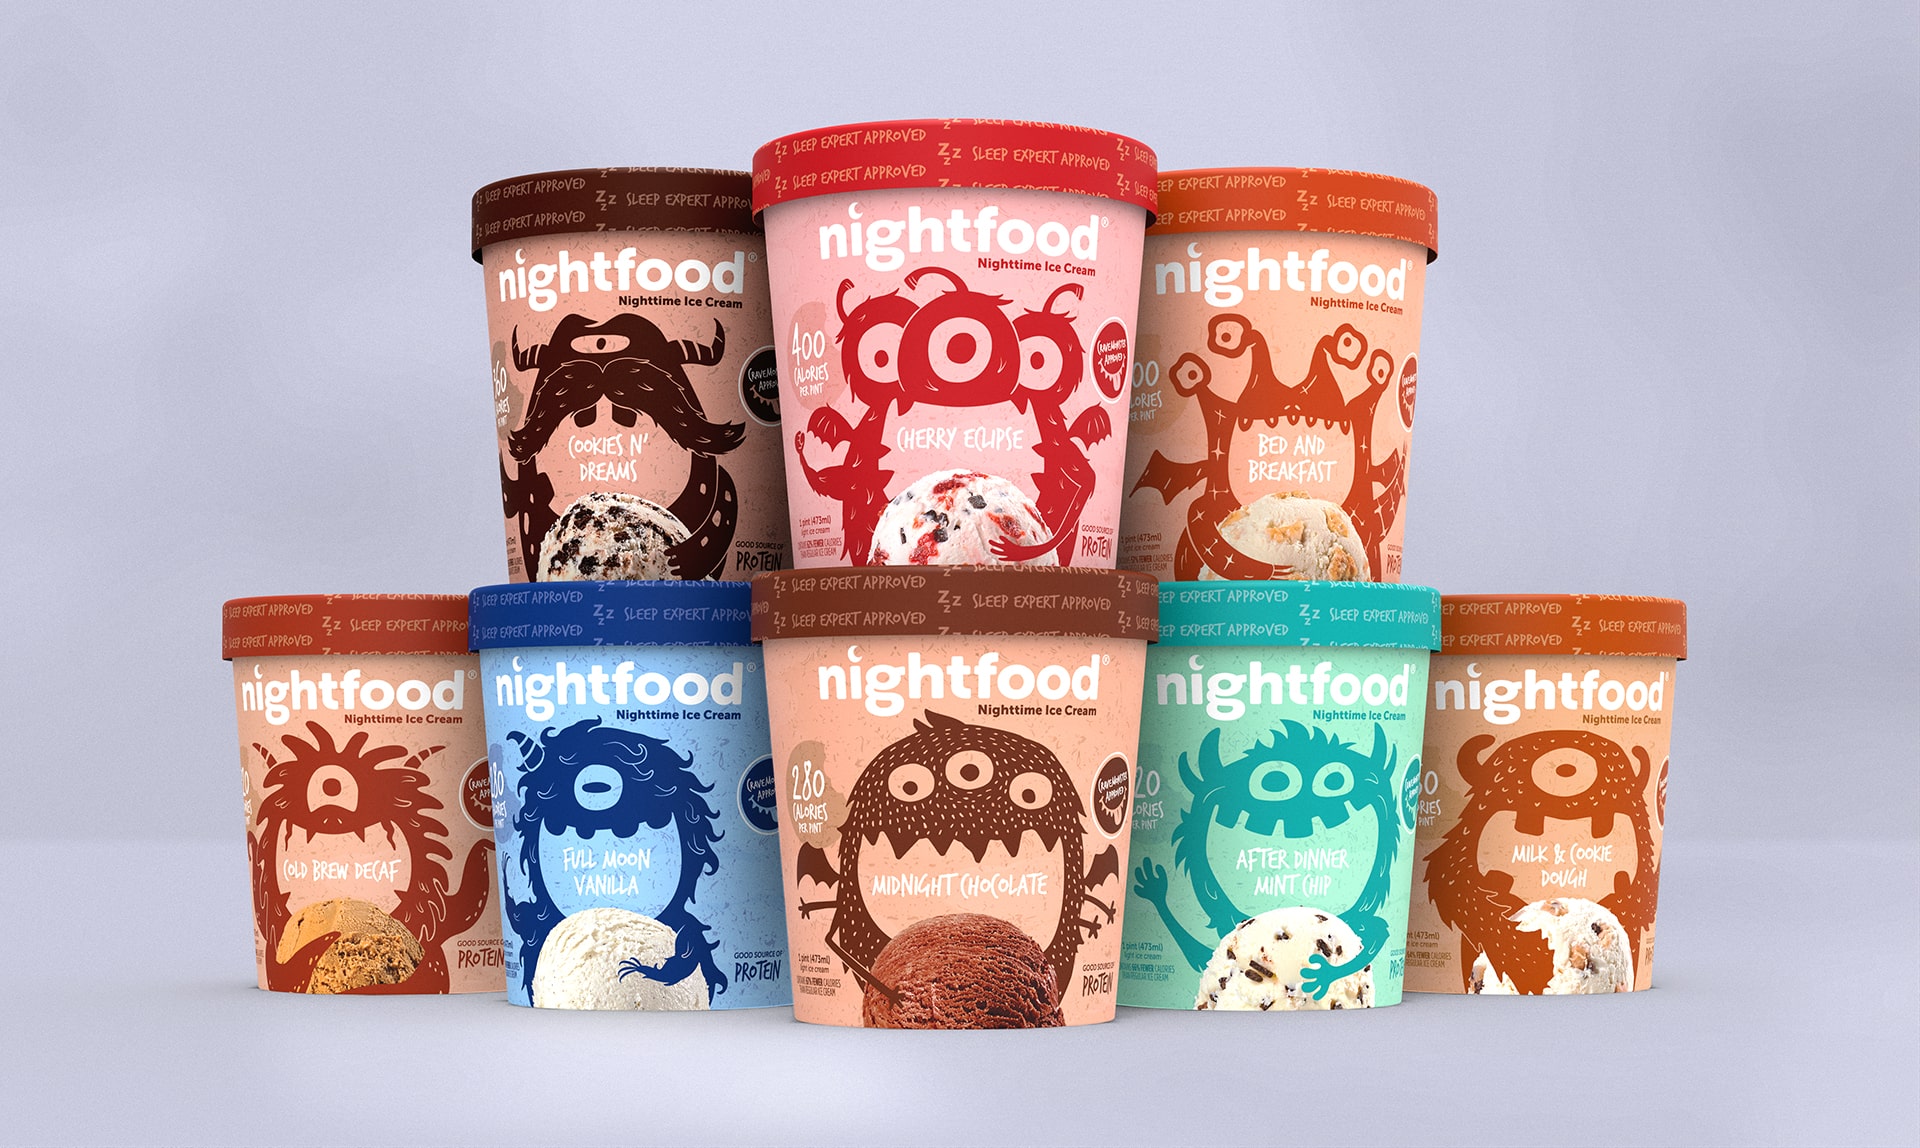 Nightfood Ice Cream Packaging All Flavors